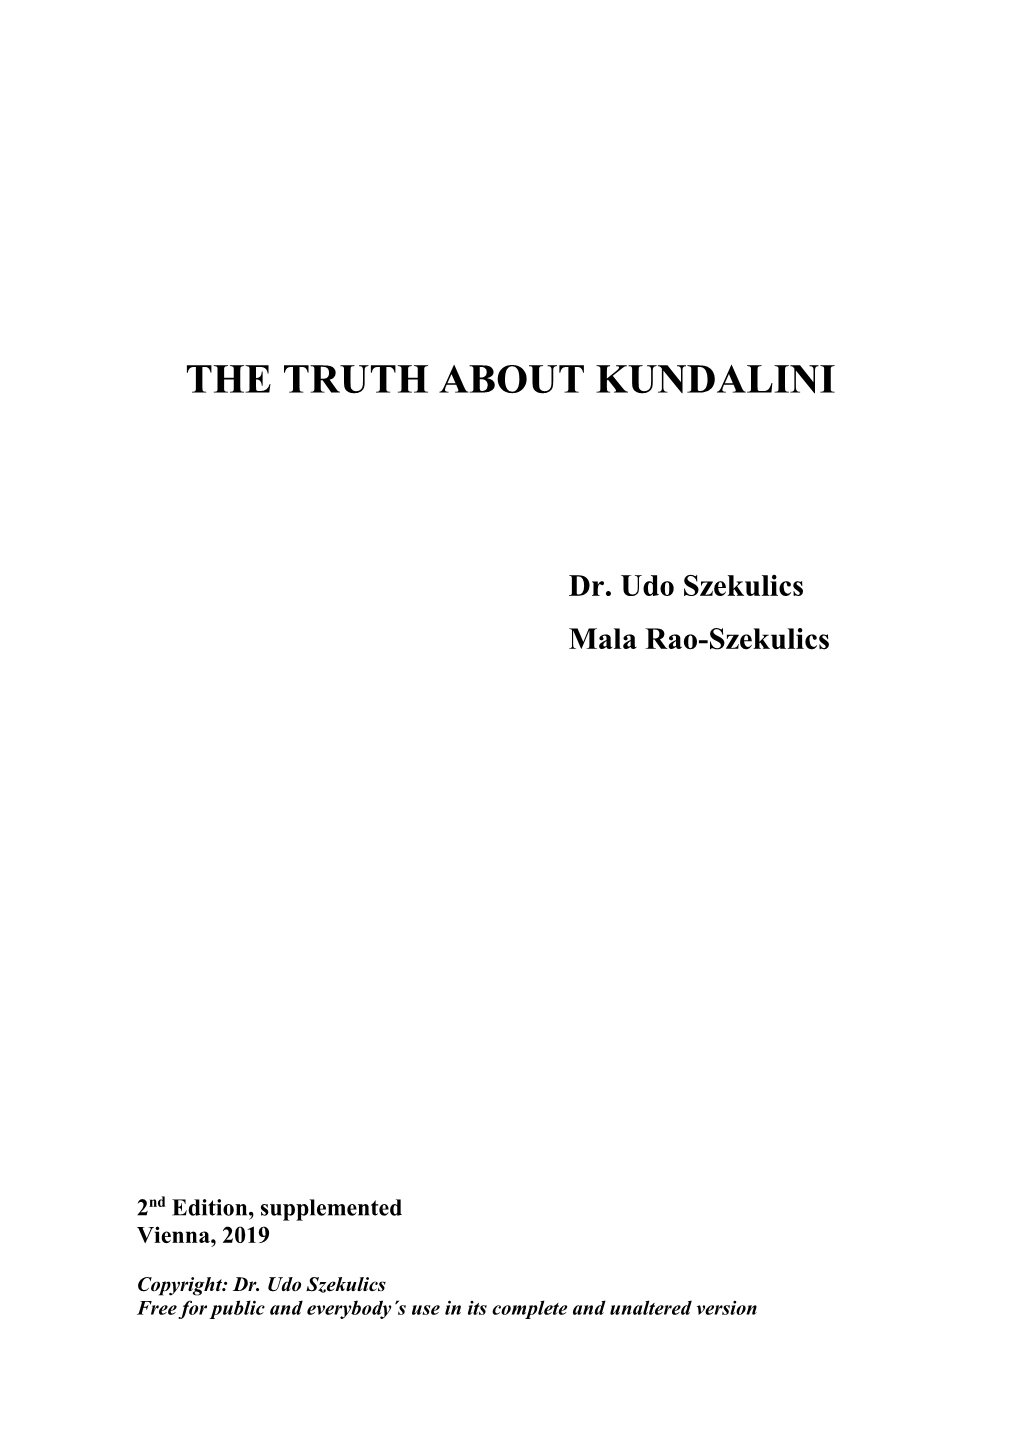 The Truth About Kundalini